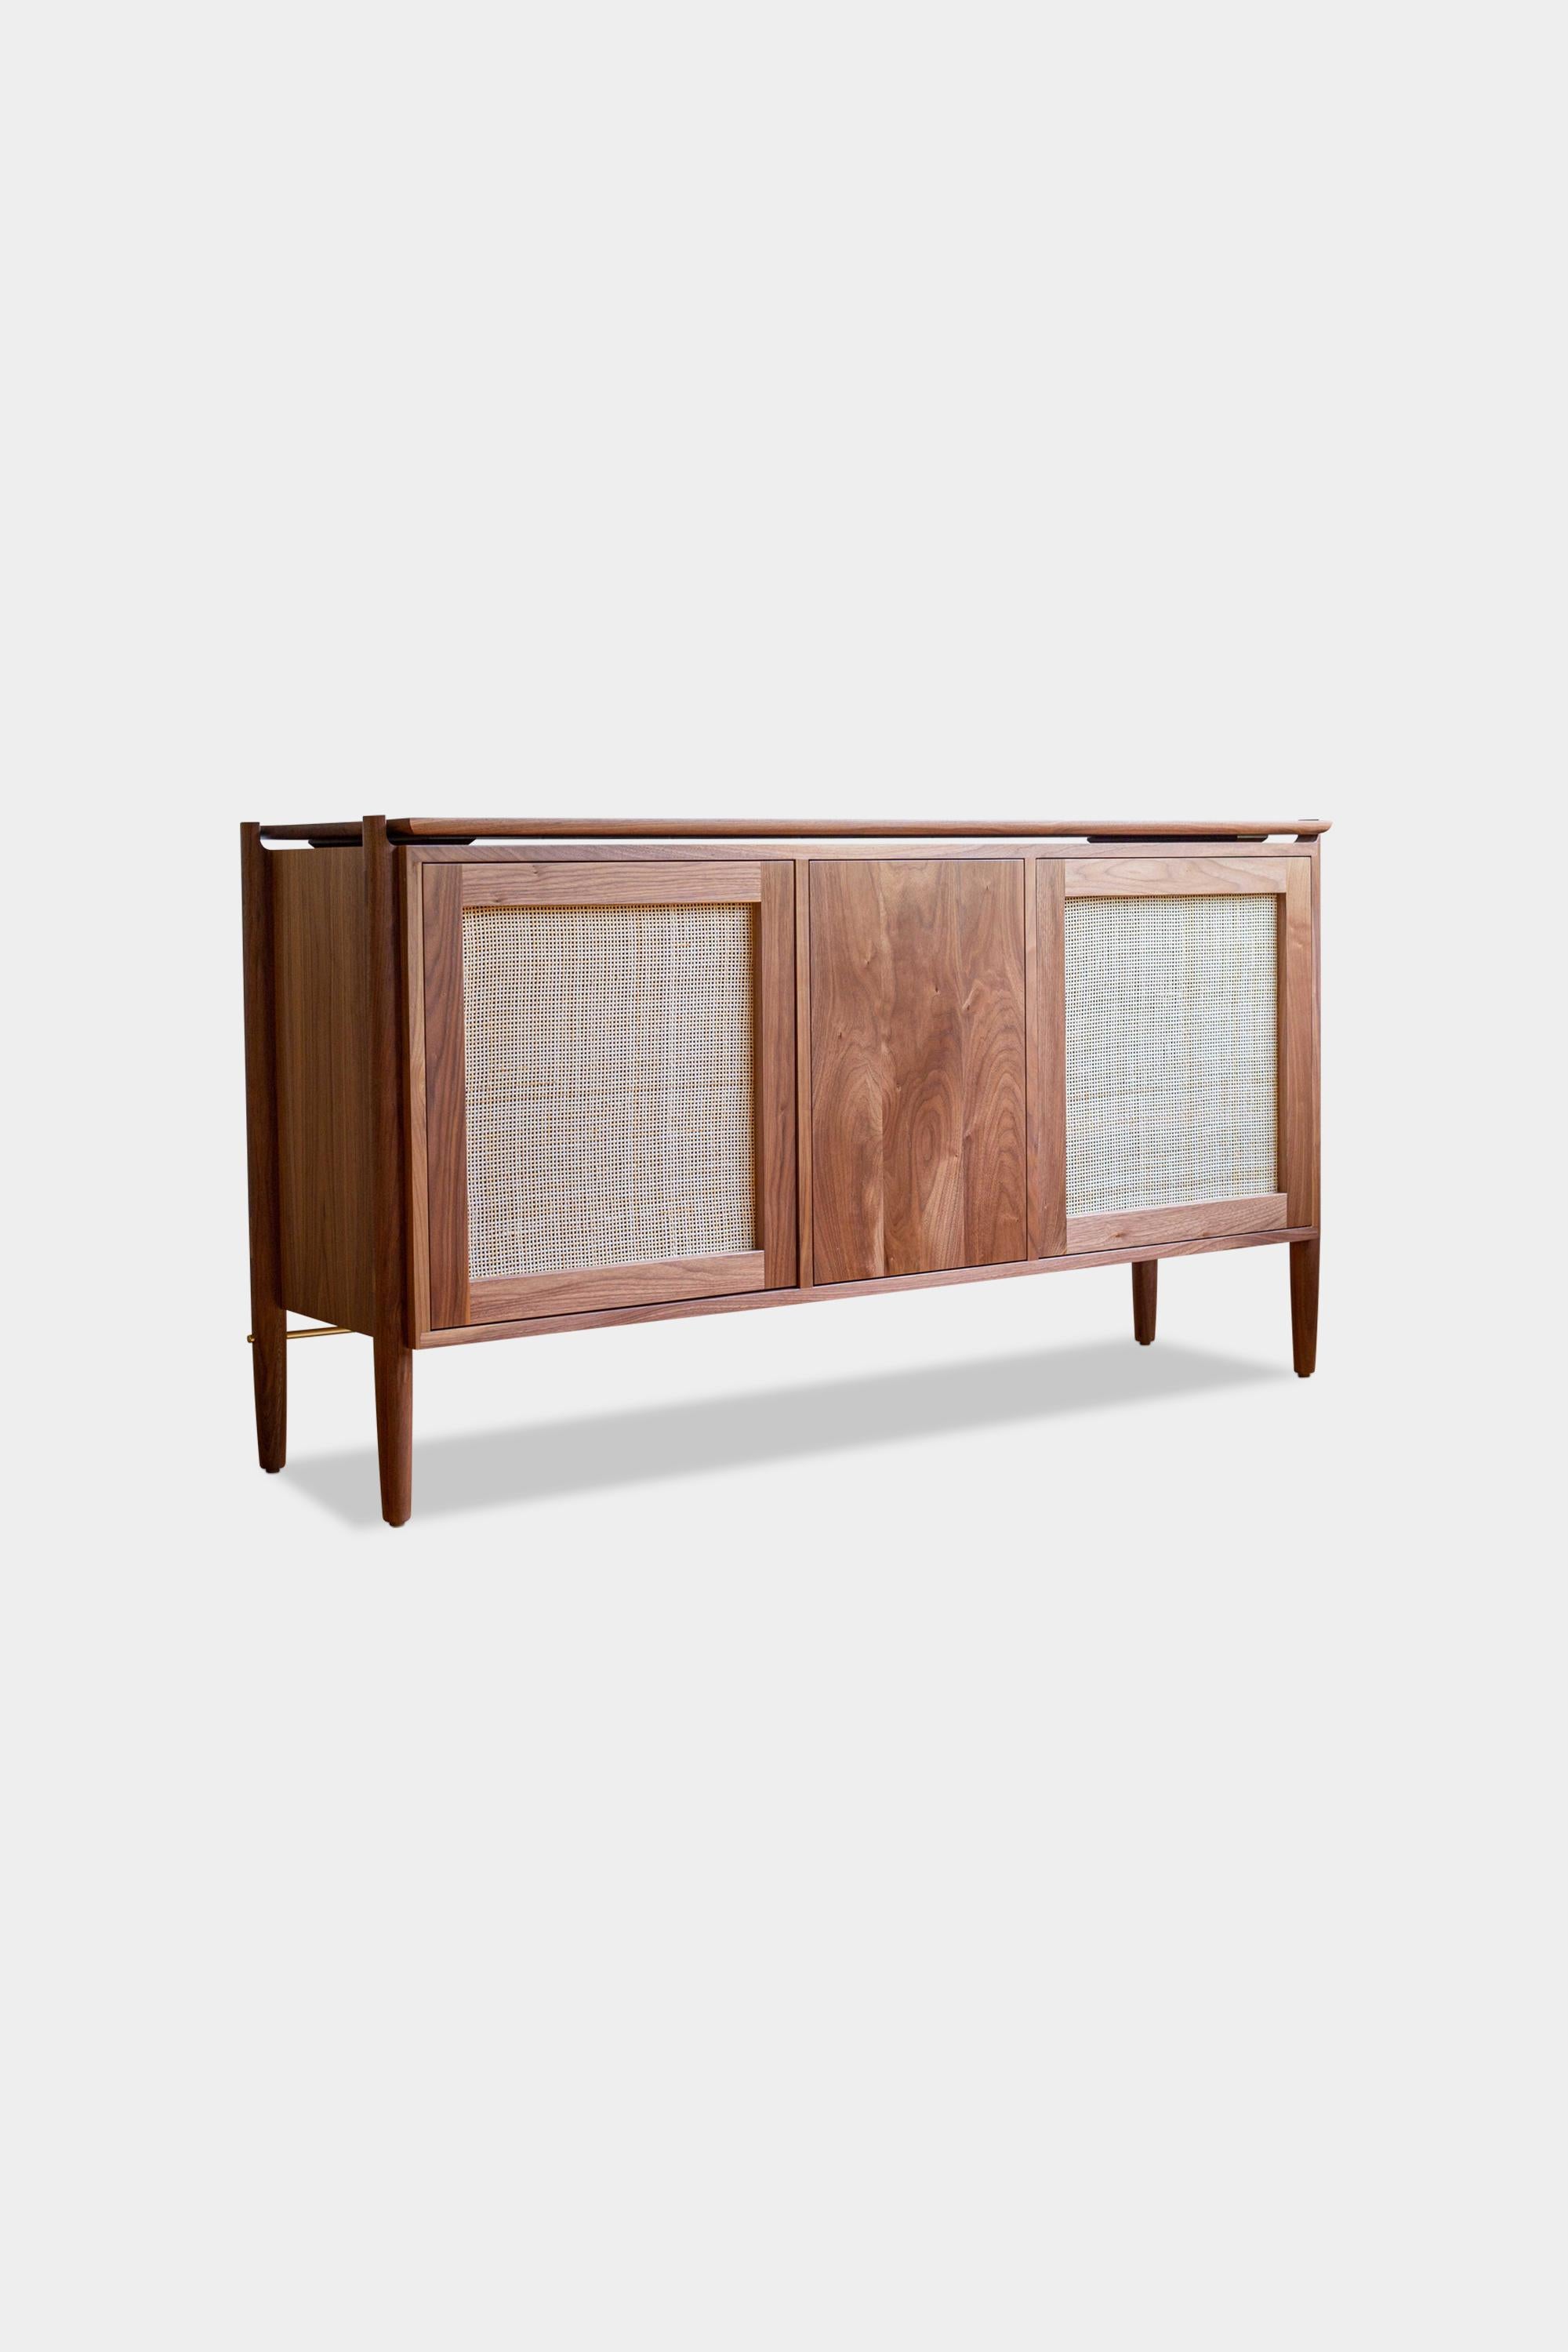 American Low KABOT Sideboard in Walnut with 3 Cabinet Doors For Sale